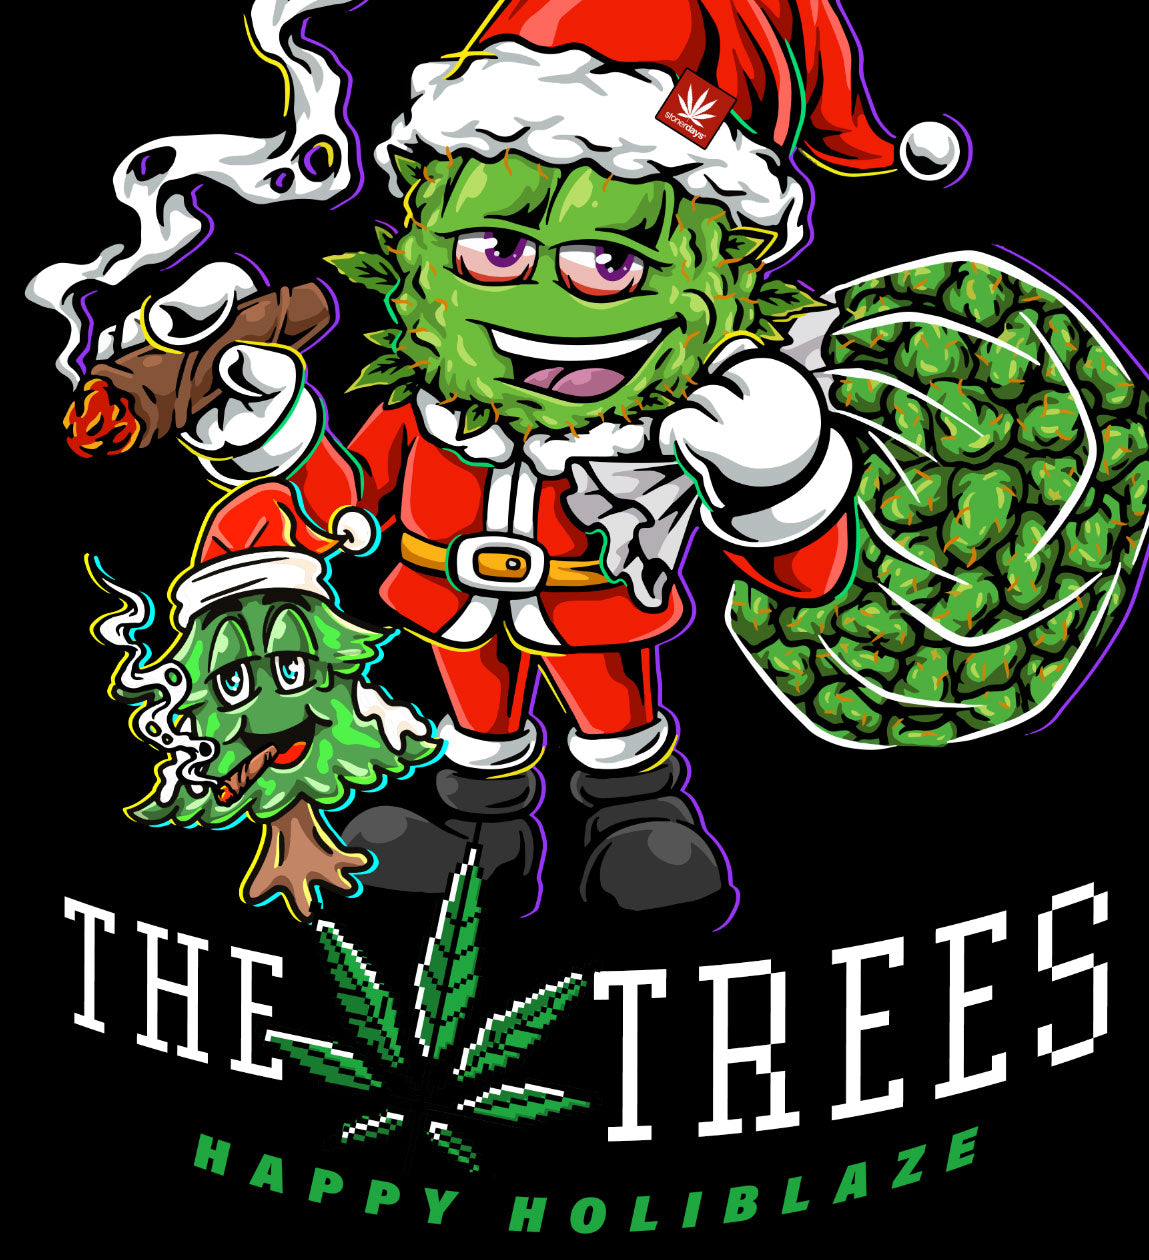 StonerDays 'I'm Here For The Trees' Long Sleeve Shirt with festive cannabis theme